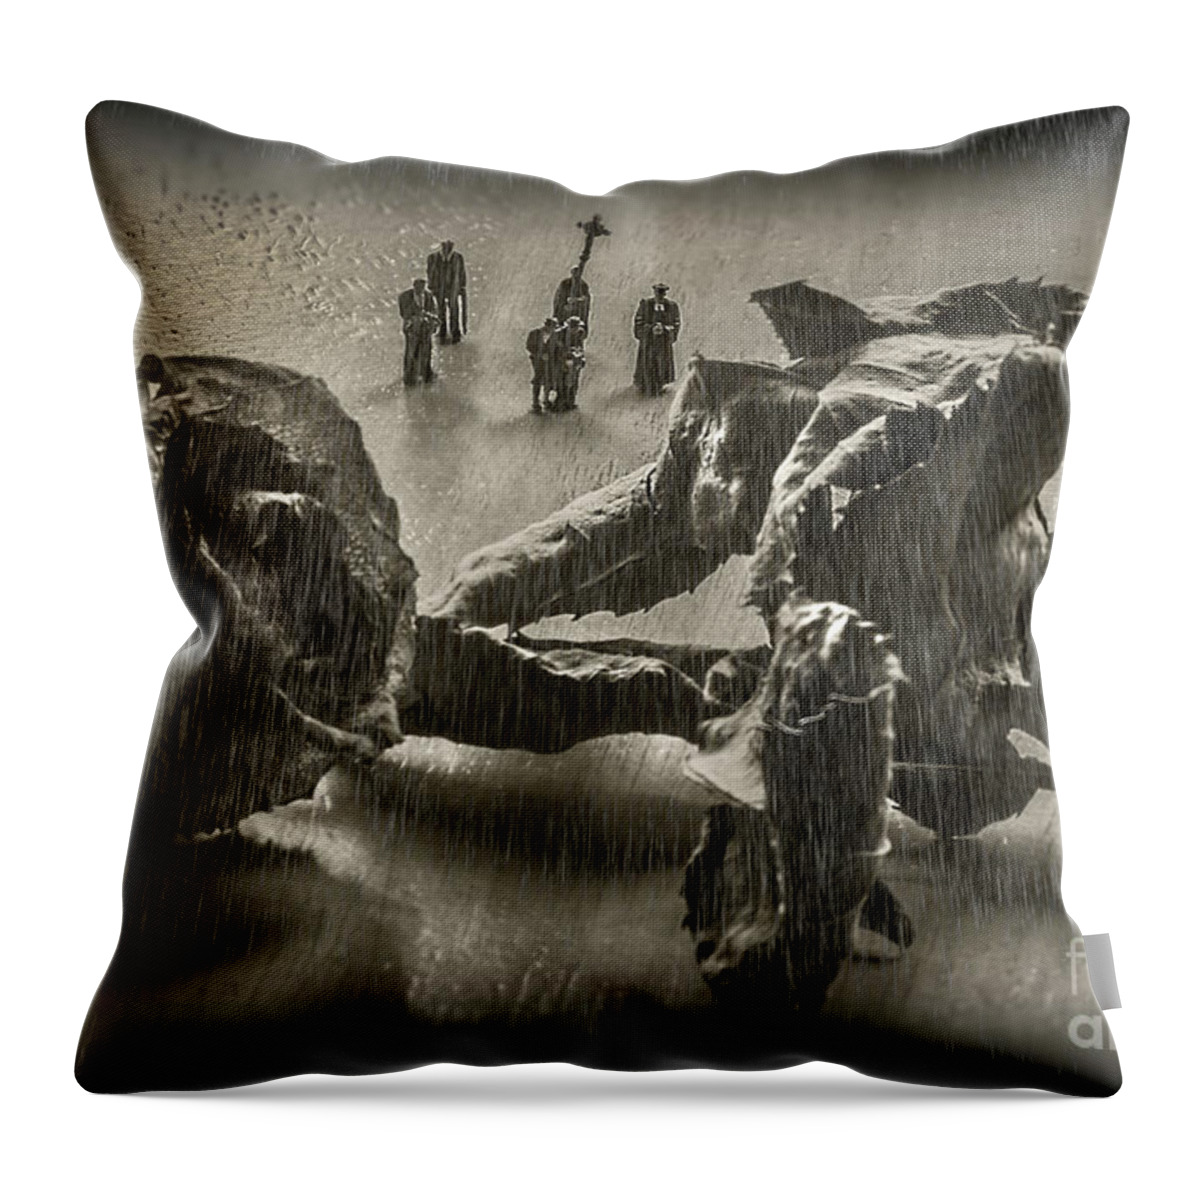 Rosebud Throw Pillow featuring the photograph The Curious Case Of Rosebud by Sandra Cockayne ADPS